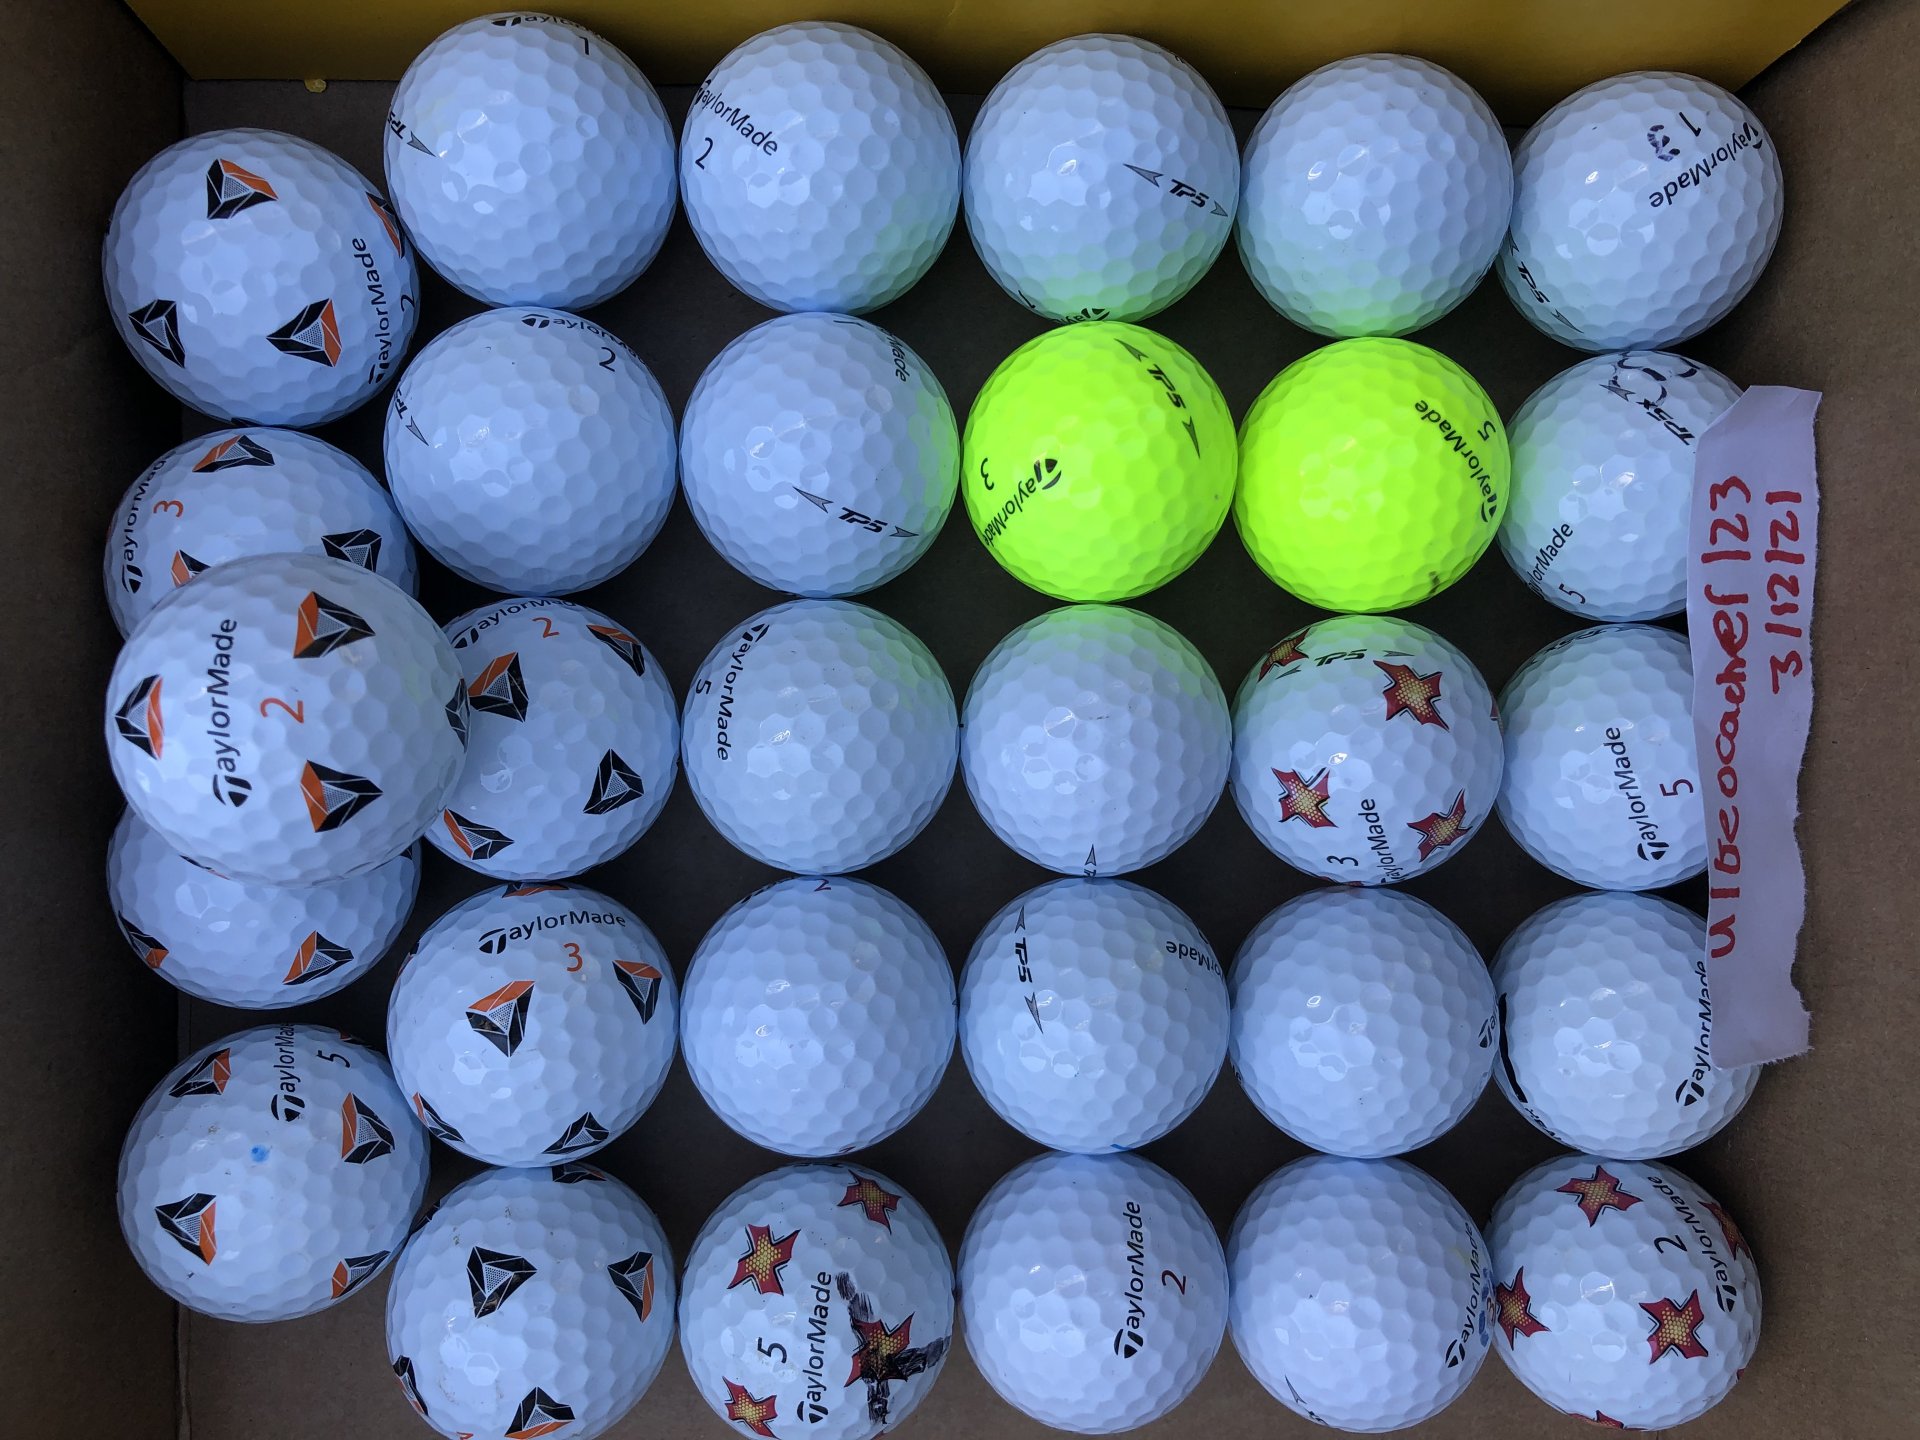 30 5a/AAAAA TaylorMade TP5/TP5x Golf balls - Buy, sell or trade new ...